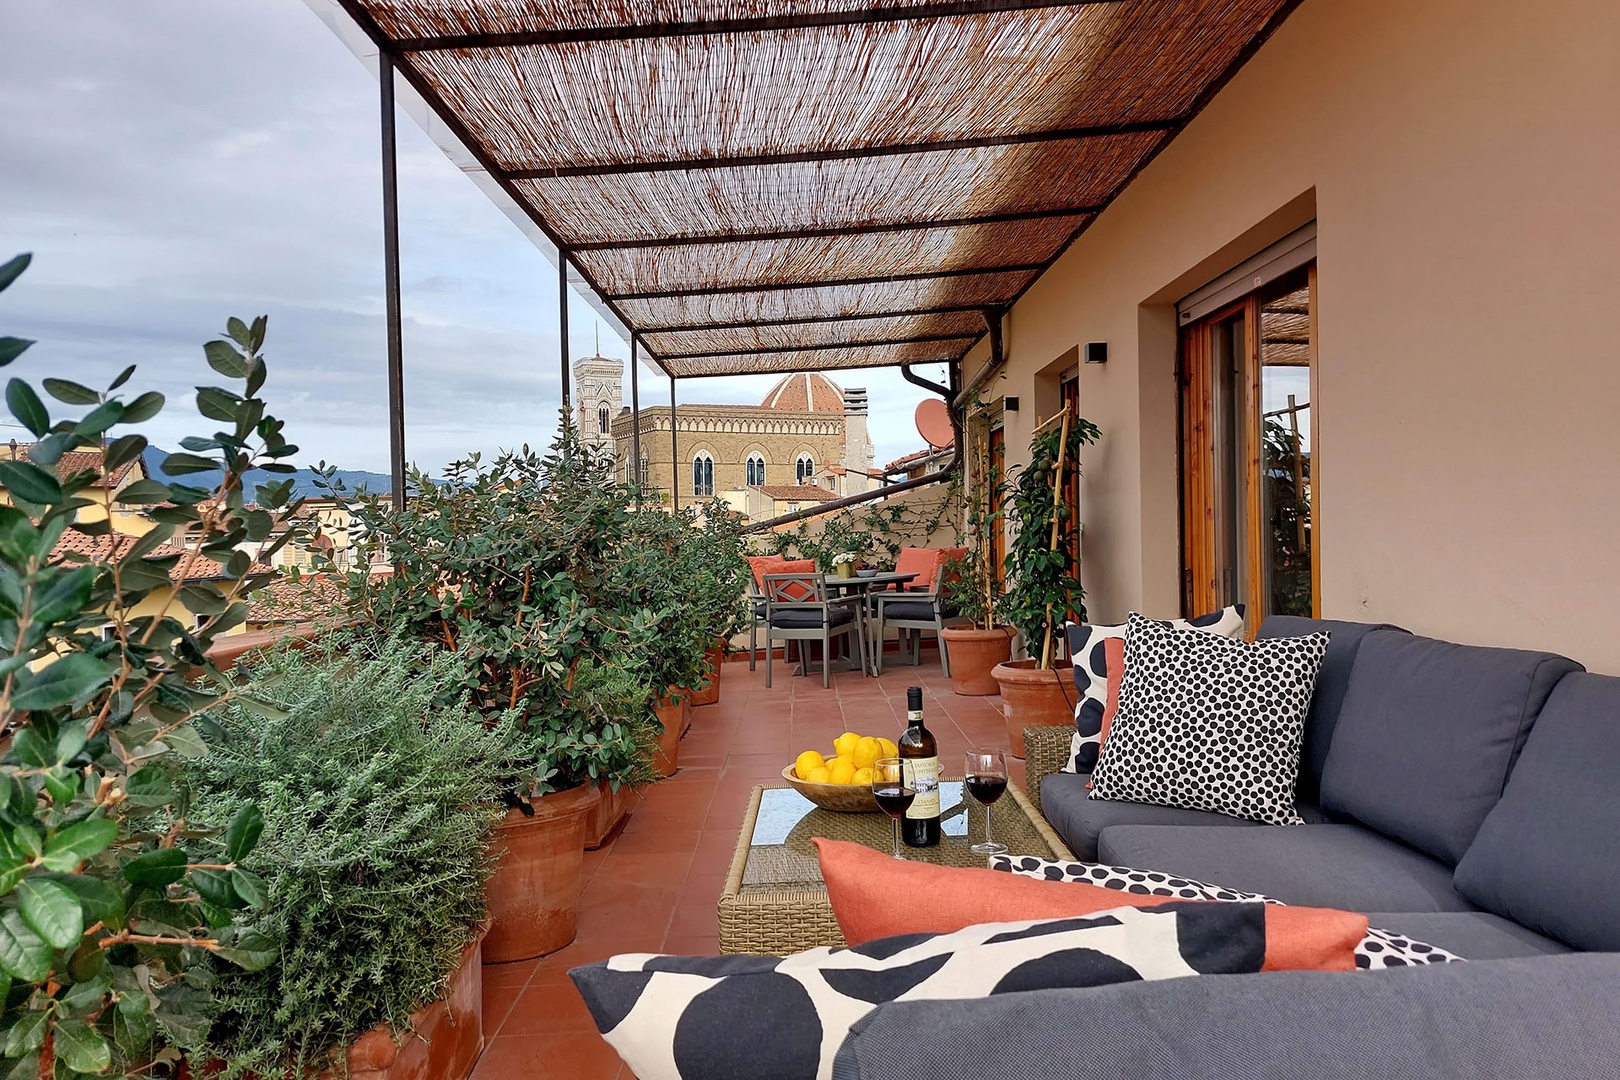 Expansive terrace with views of the Duomo